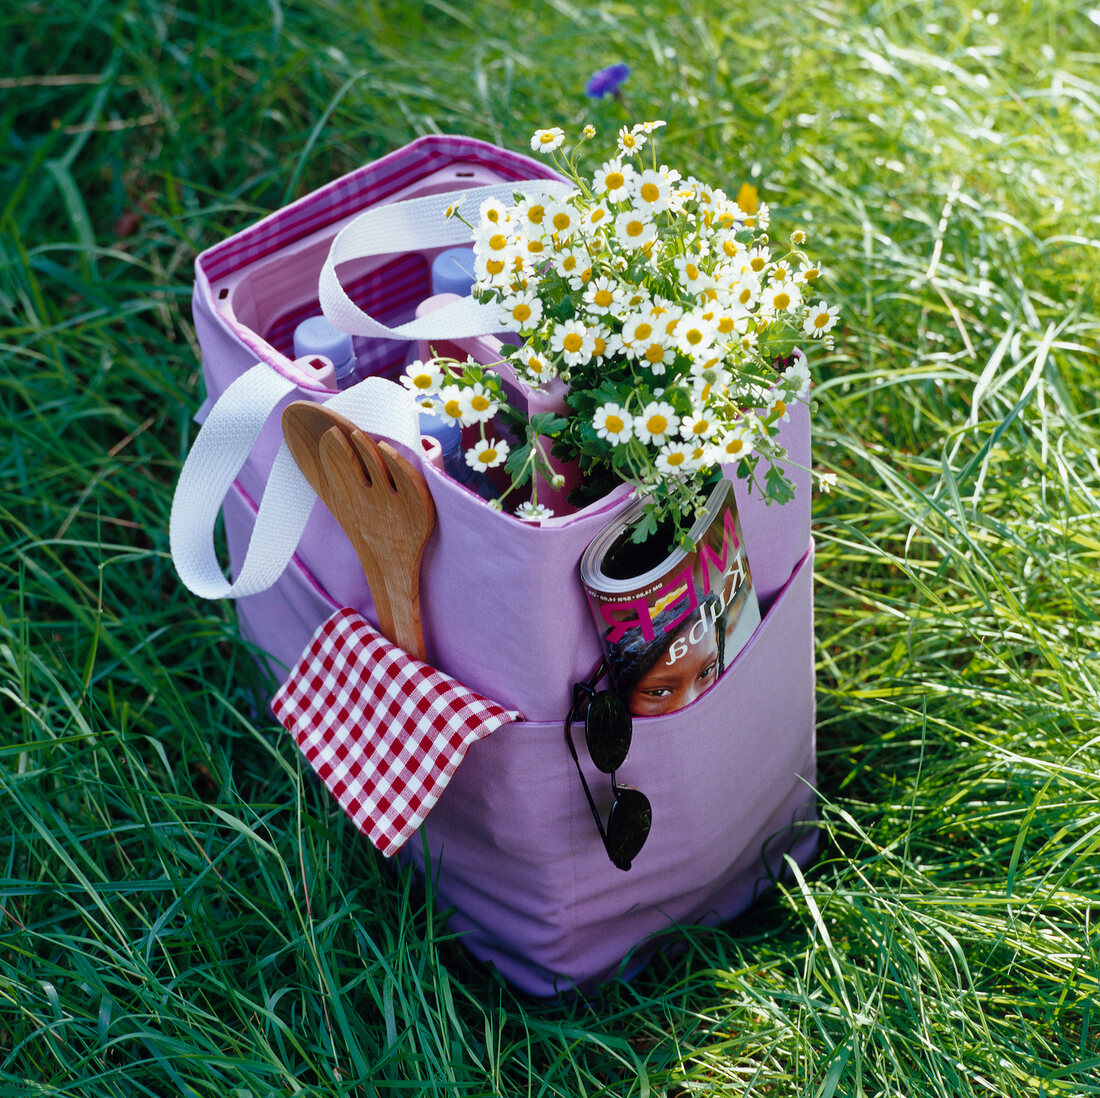 Packed picnic bag with flowers, sunglasses, journal and bottles